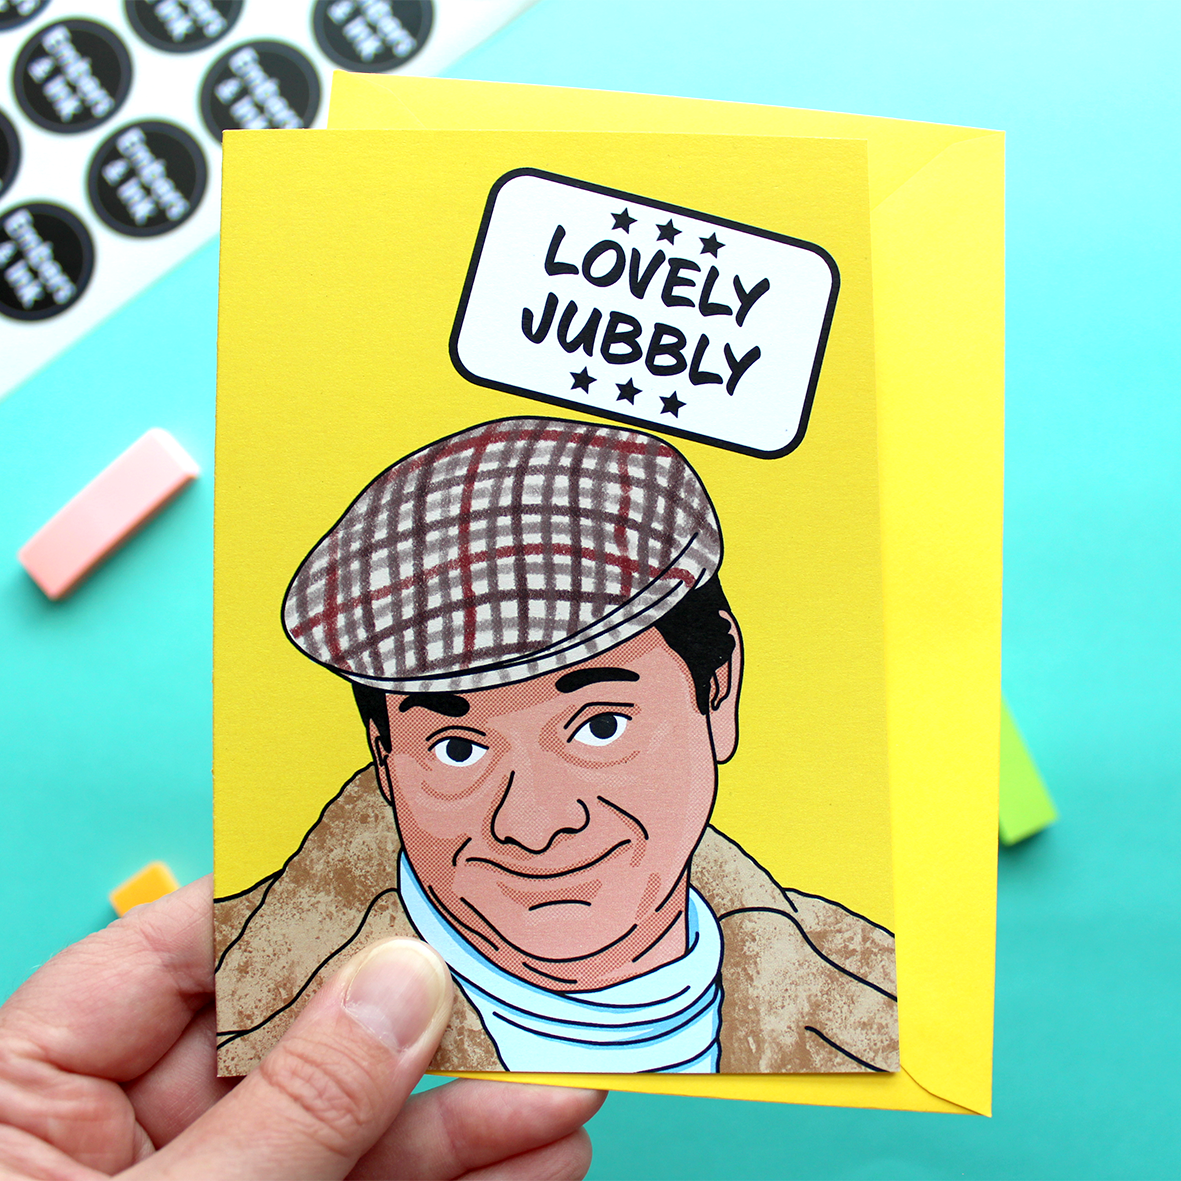 A hand holds a yellow card with an illustration of Del Boy from a well known 80s TV programme. Above him in a white box are the words ‘Lovely Jubbly’